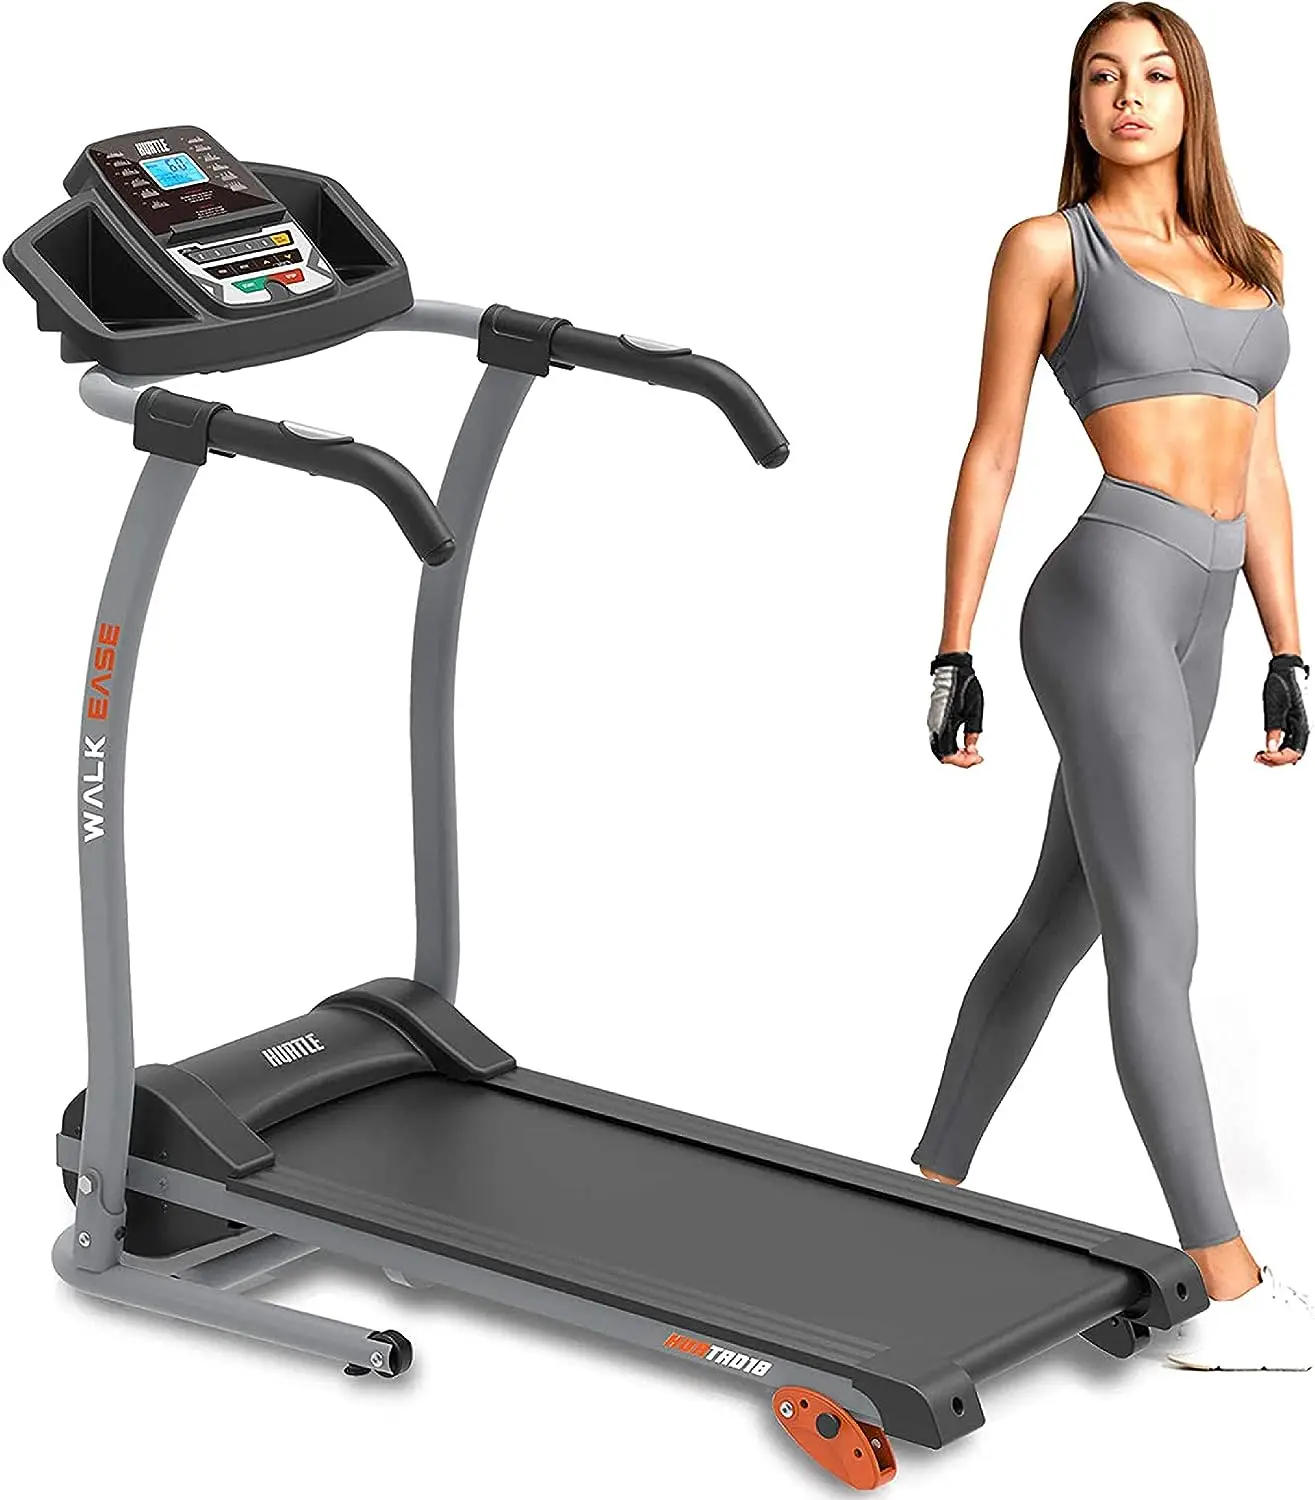 

Treadmill Exercise Machine - Smart Compact Digital Fitness Treadmill Workout Trainer w/Bluetooth App Sync, Manual Incline Adjust